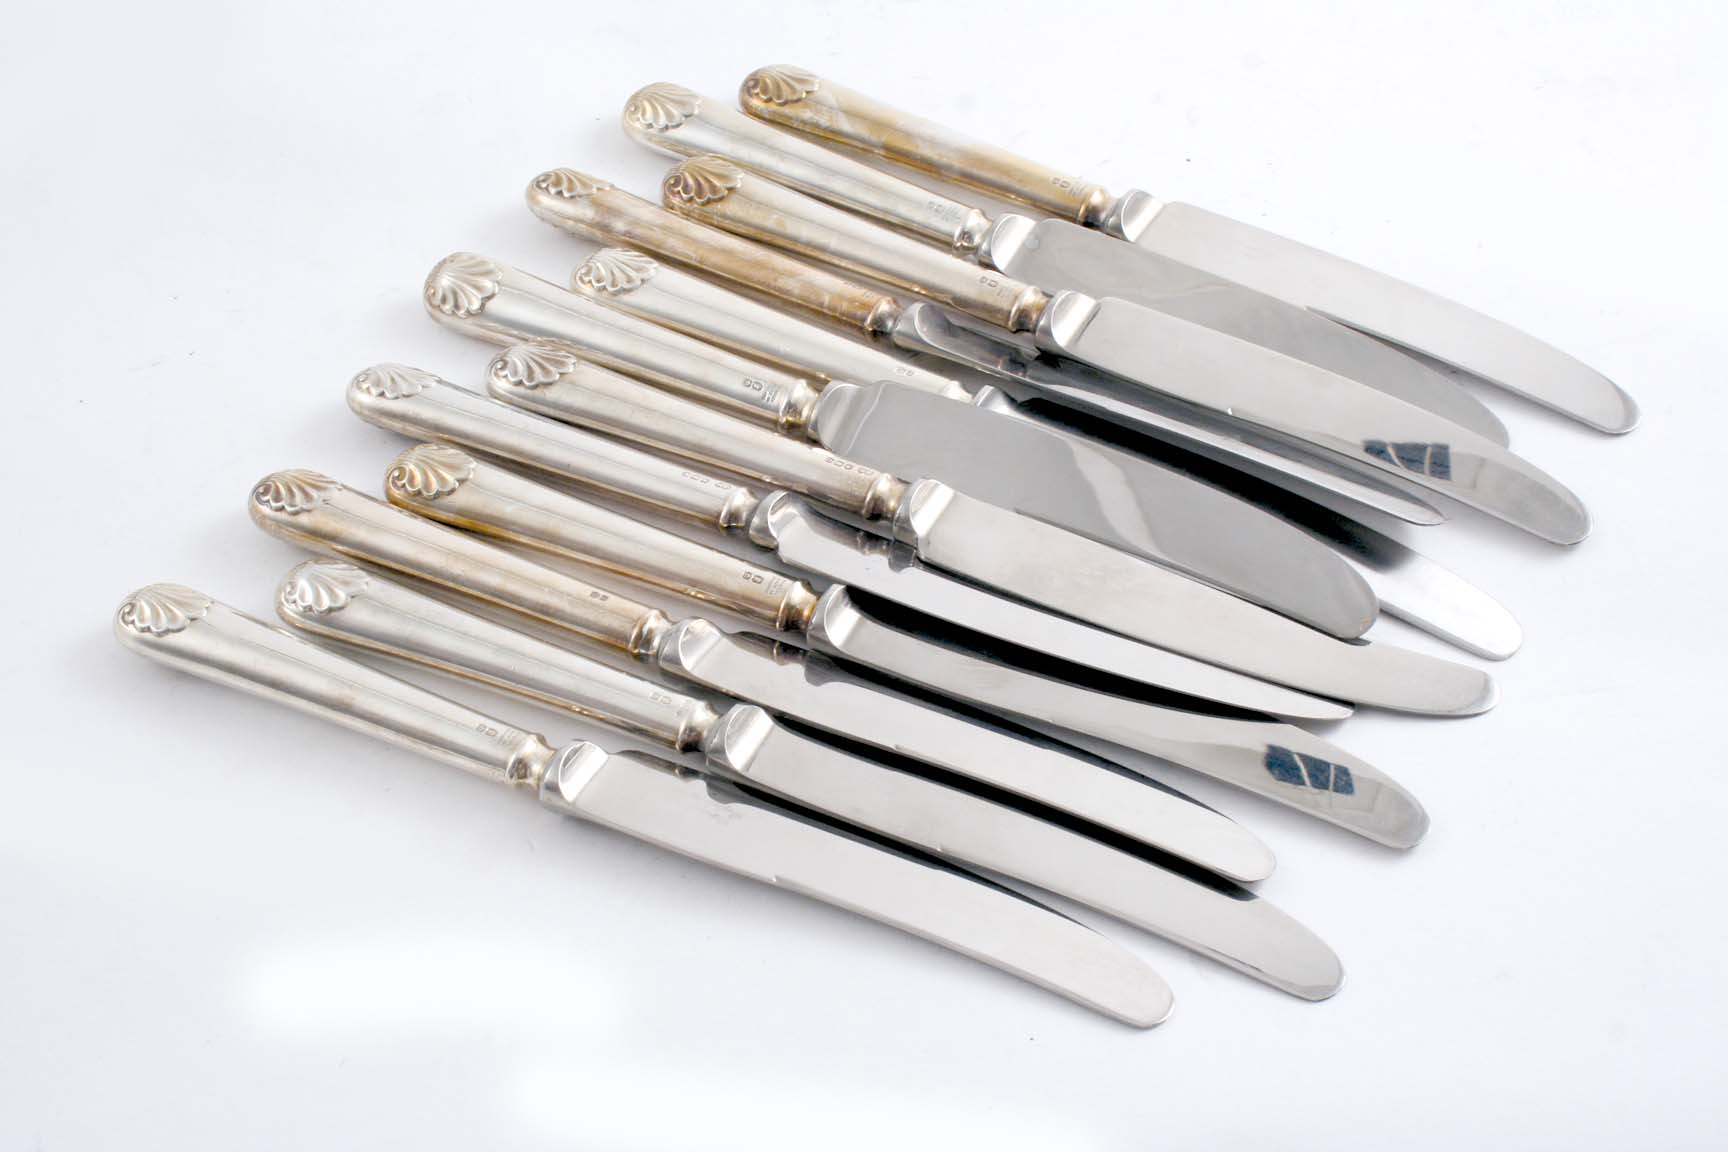 A MATCHED SET OF TWELVE MODERN SIDE KNIVES Old English Shell pattern with stainless steel, finger